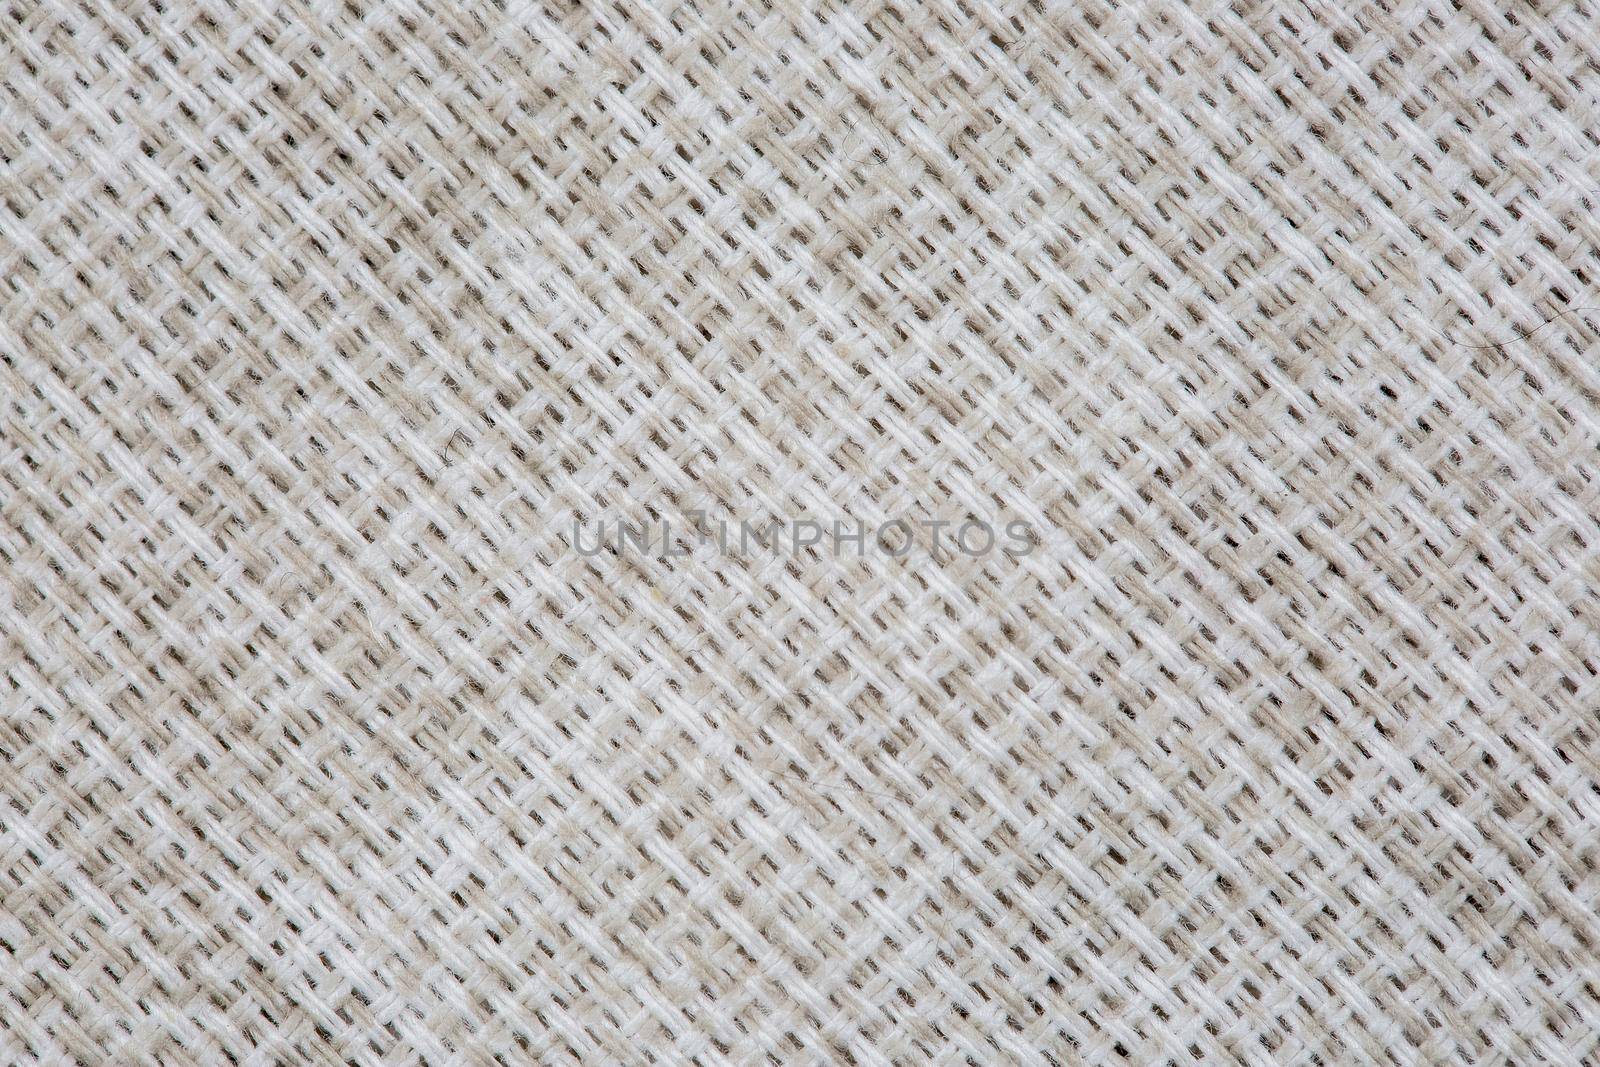 Close-up texture of factory fabric, interlacing of threads.